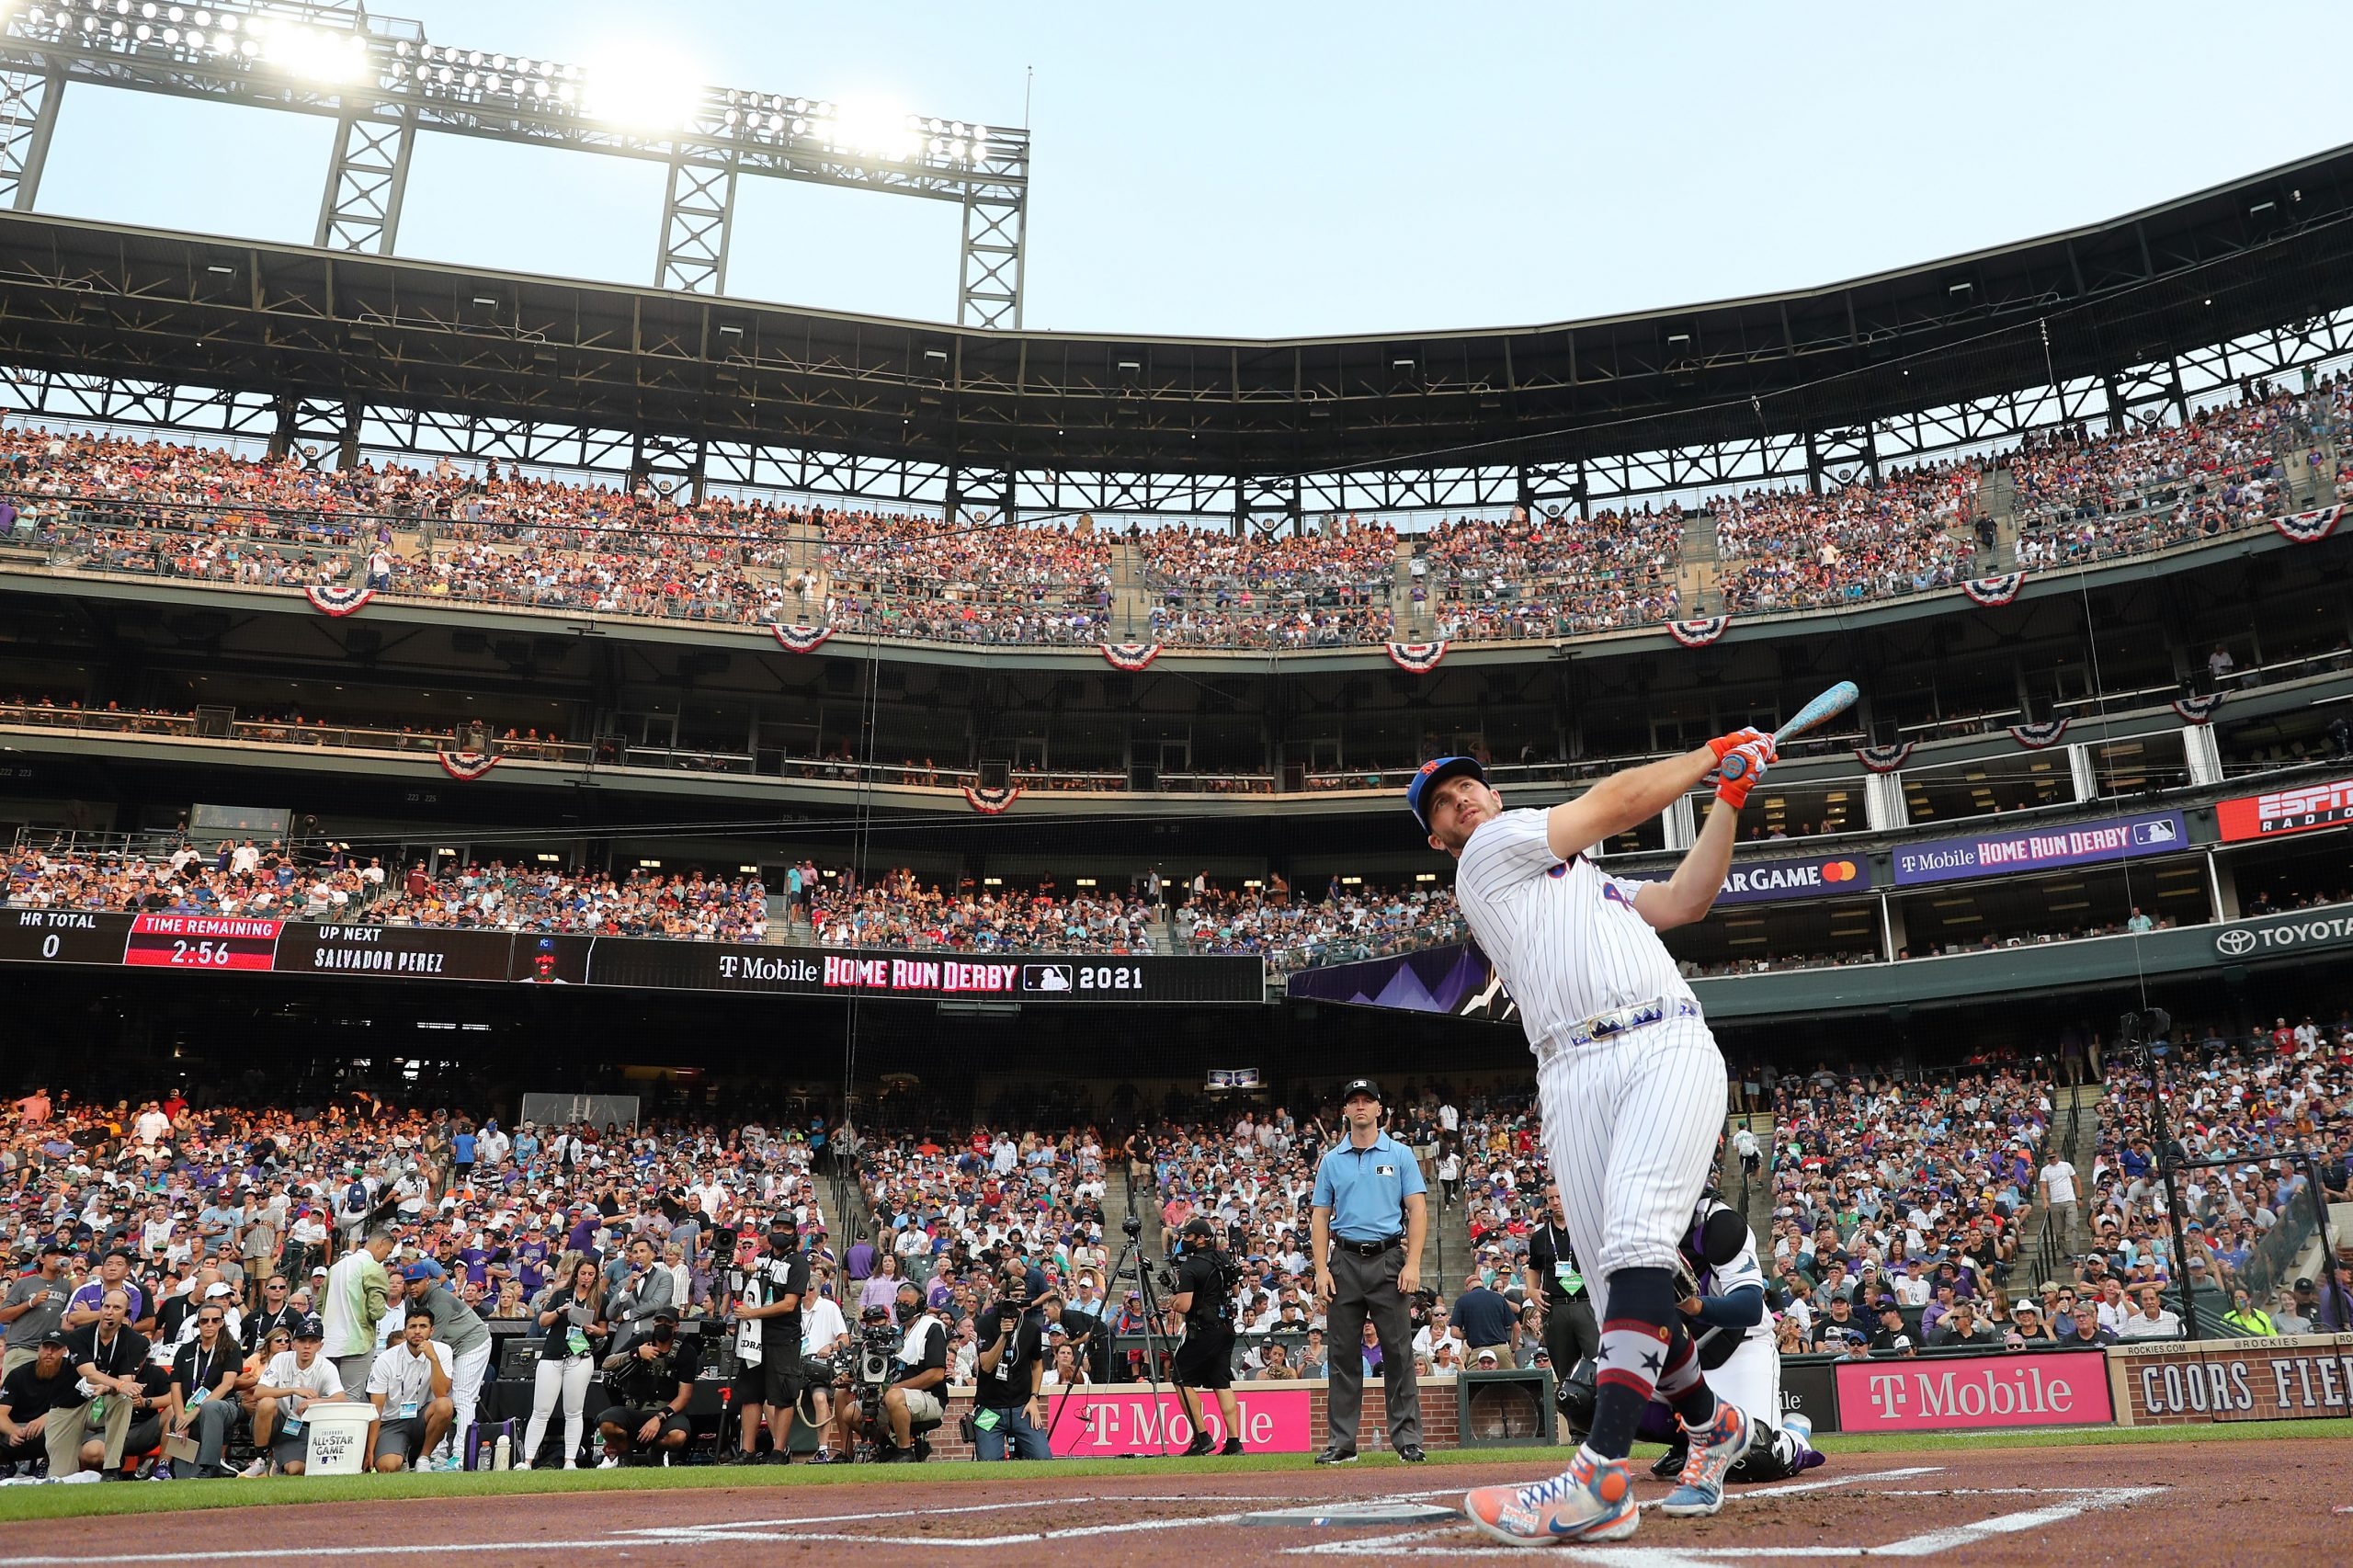 Home Run Derby: NY Mets star Pete Alonso wins second title in Colorado